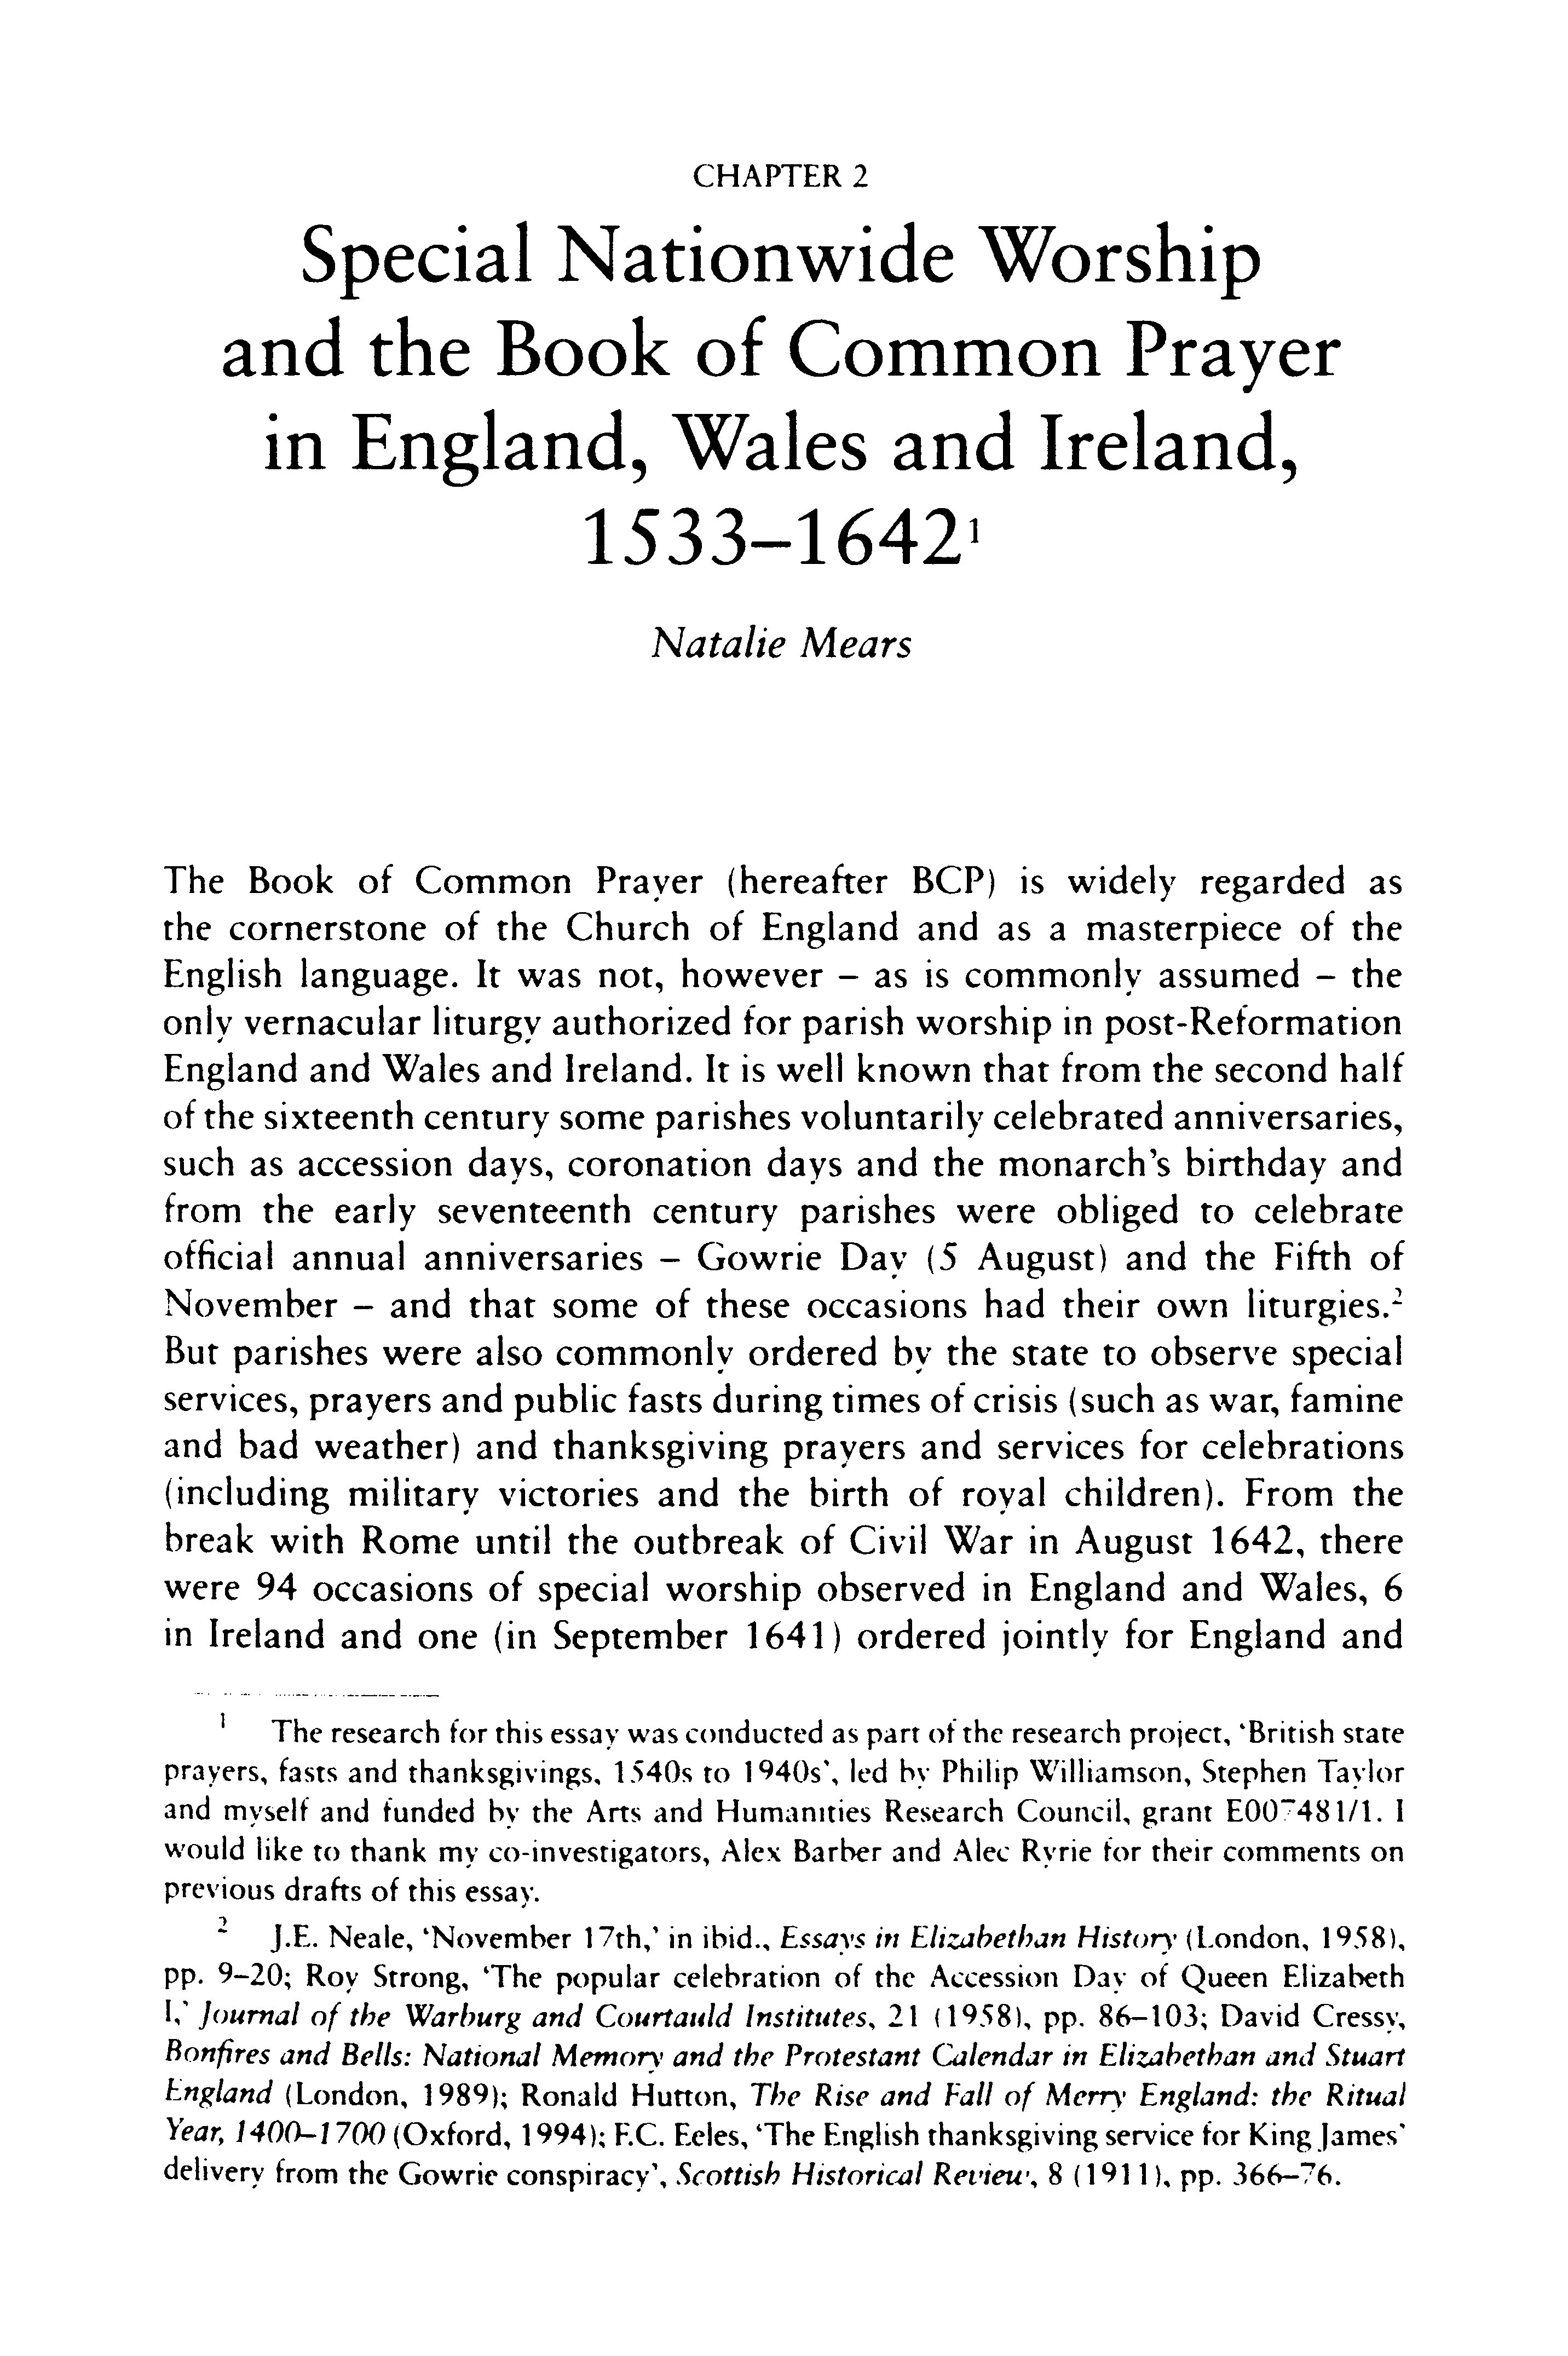 Special nationwide worship and the Book of Common Prayer in England, Wales and Ireland, 1533-1642 Thumbnail